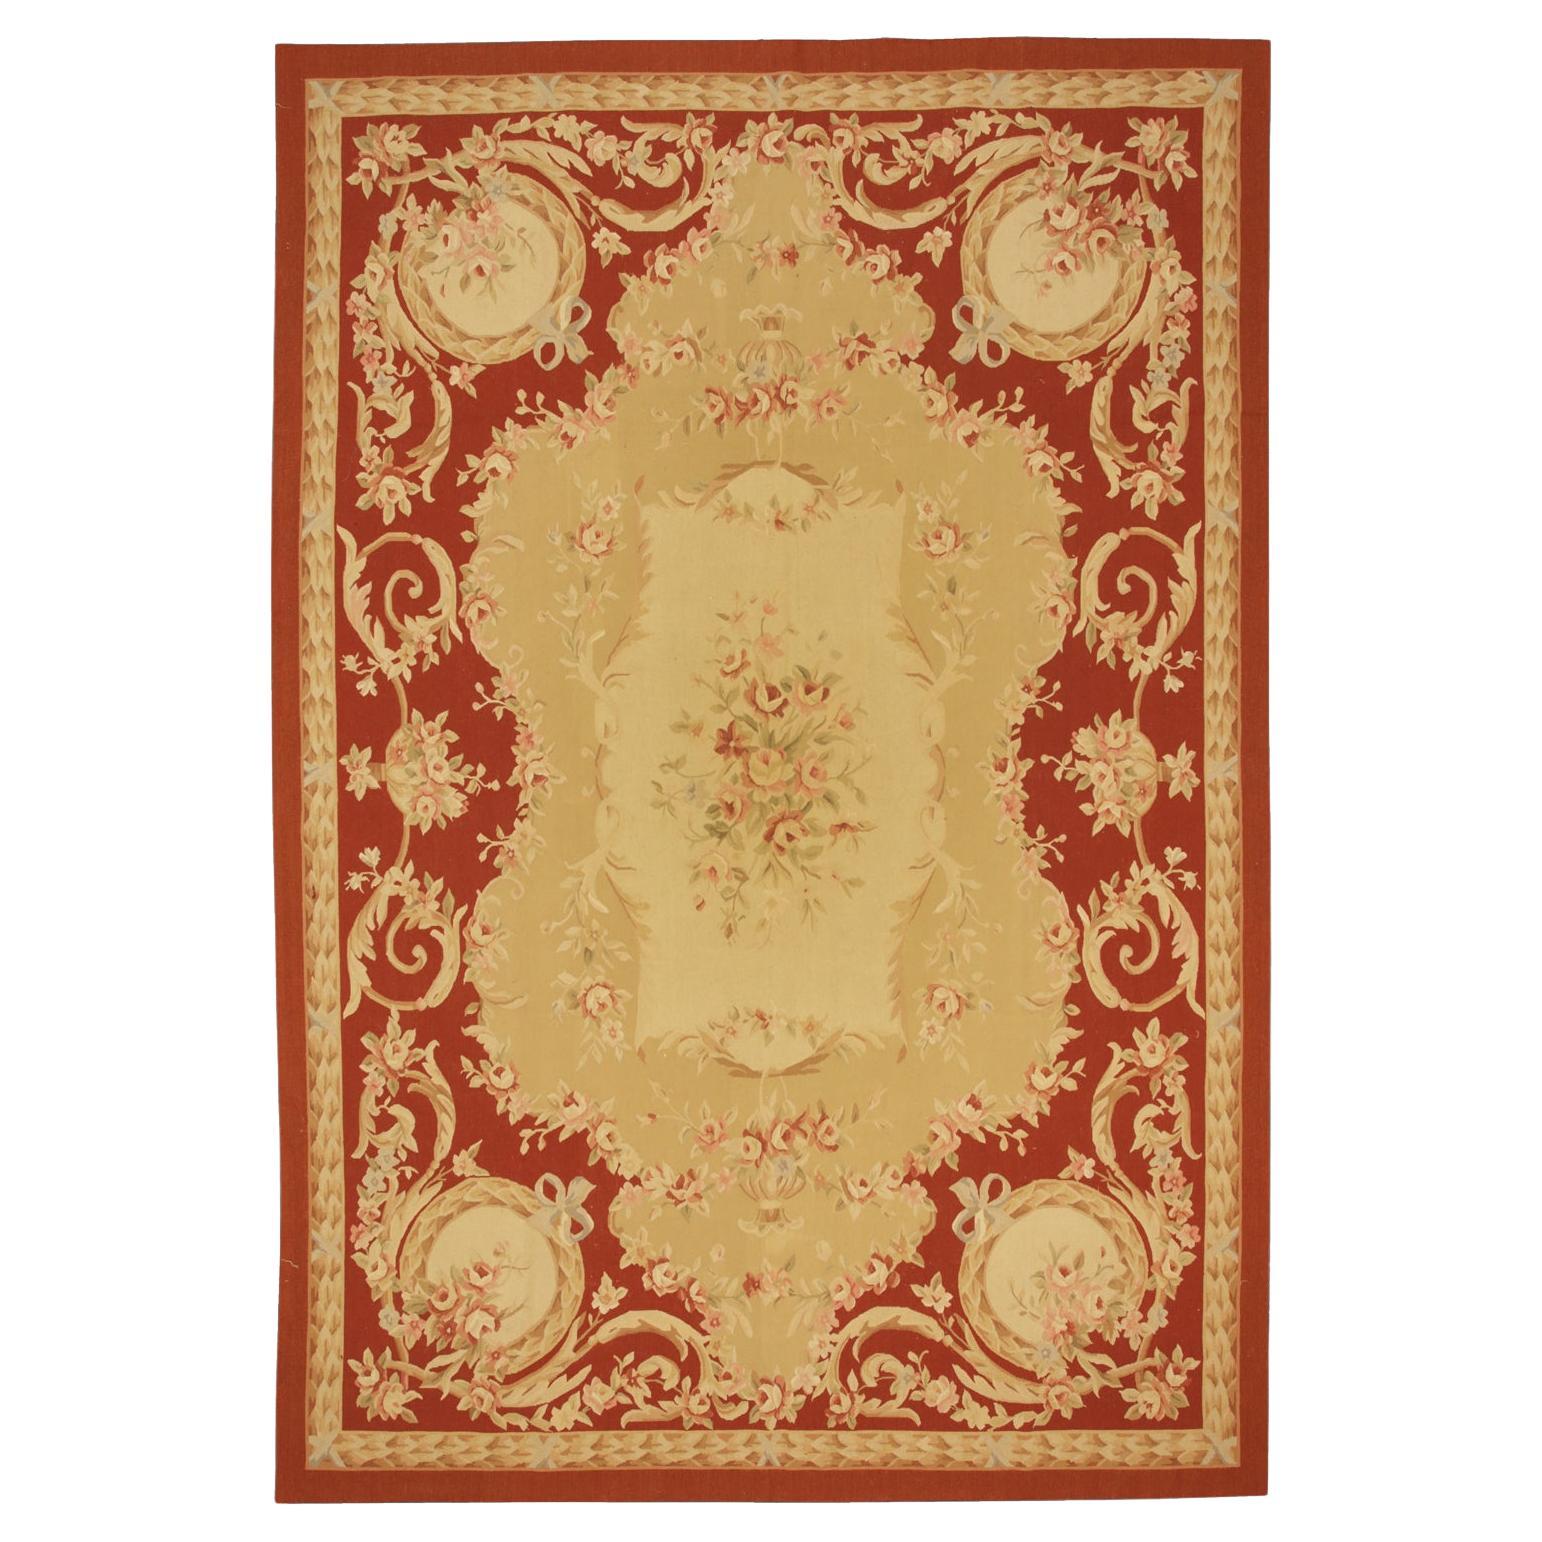 Chinese Aubusson Flat-Weave Rug with Medallion and Floral Design, 21st Century